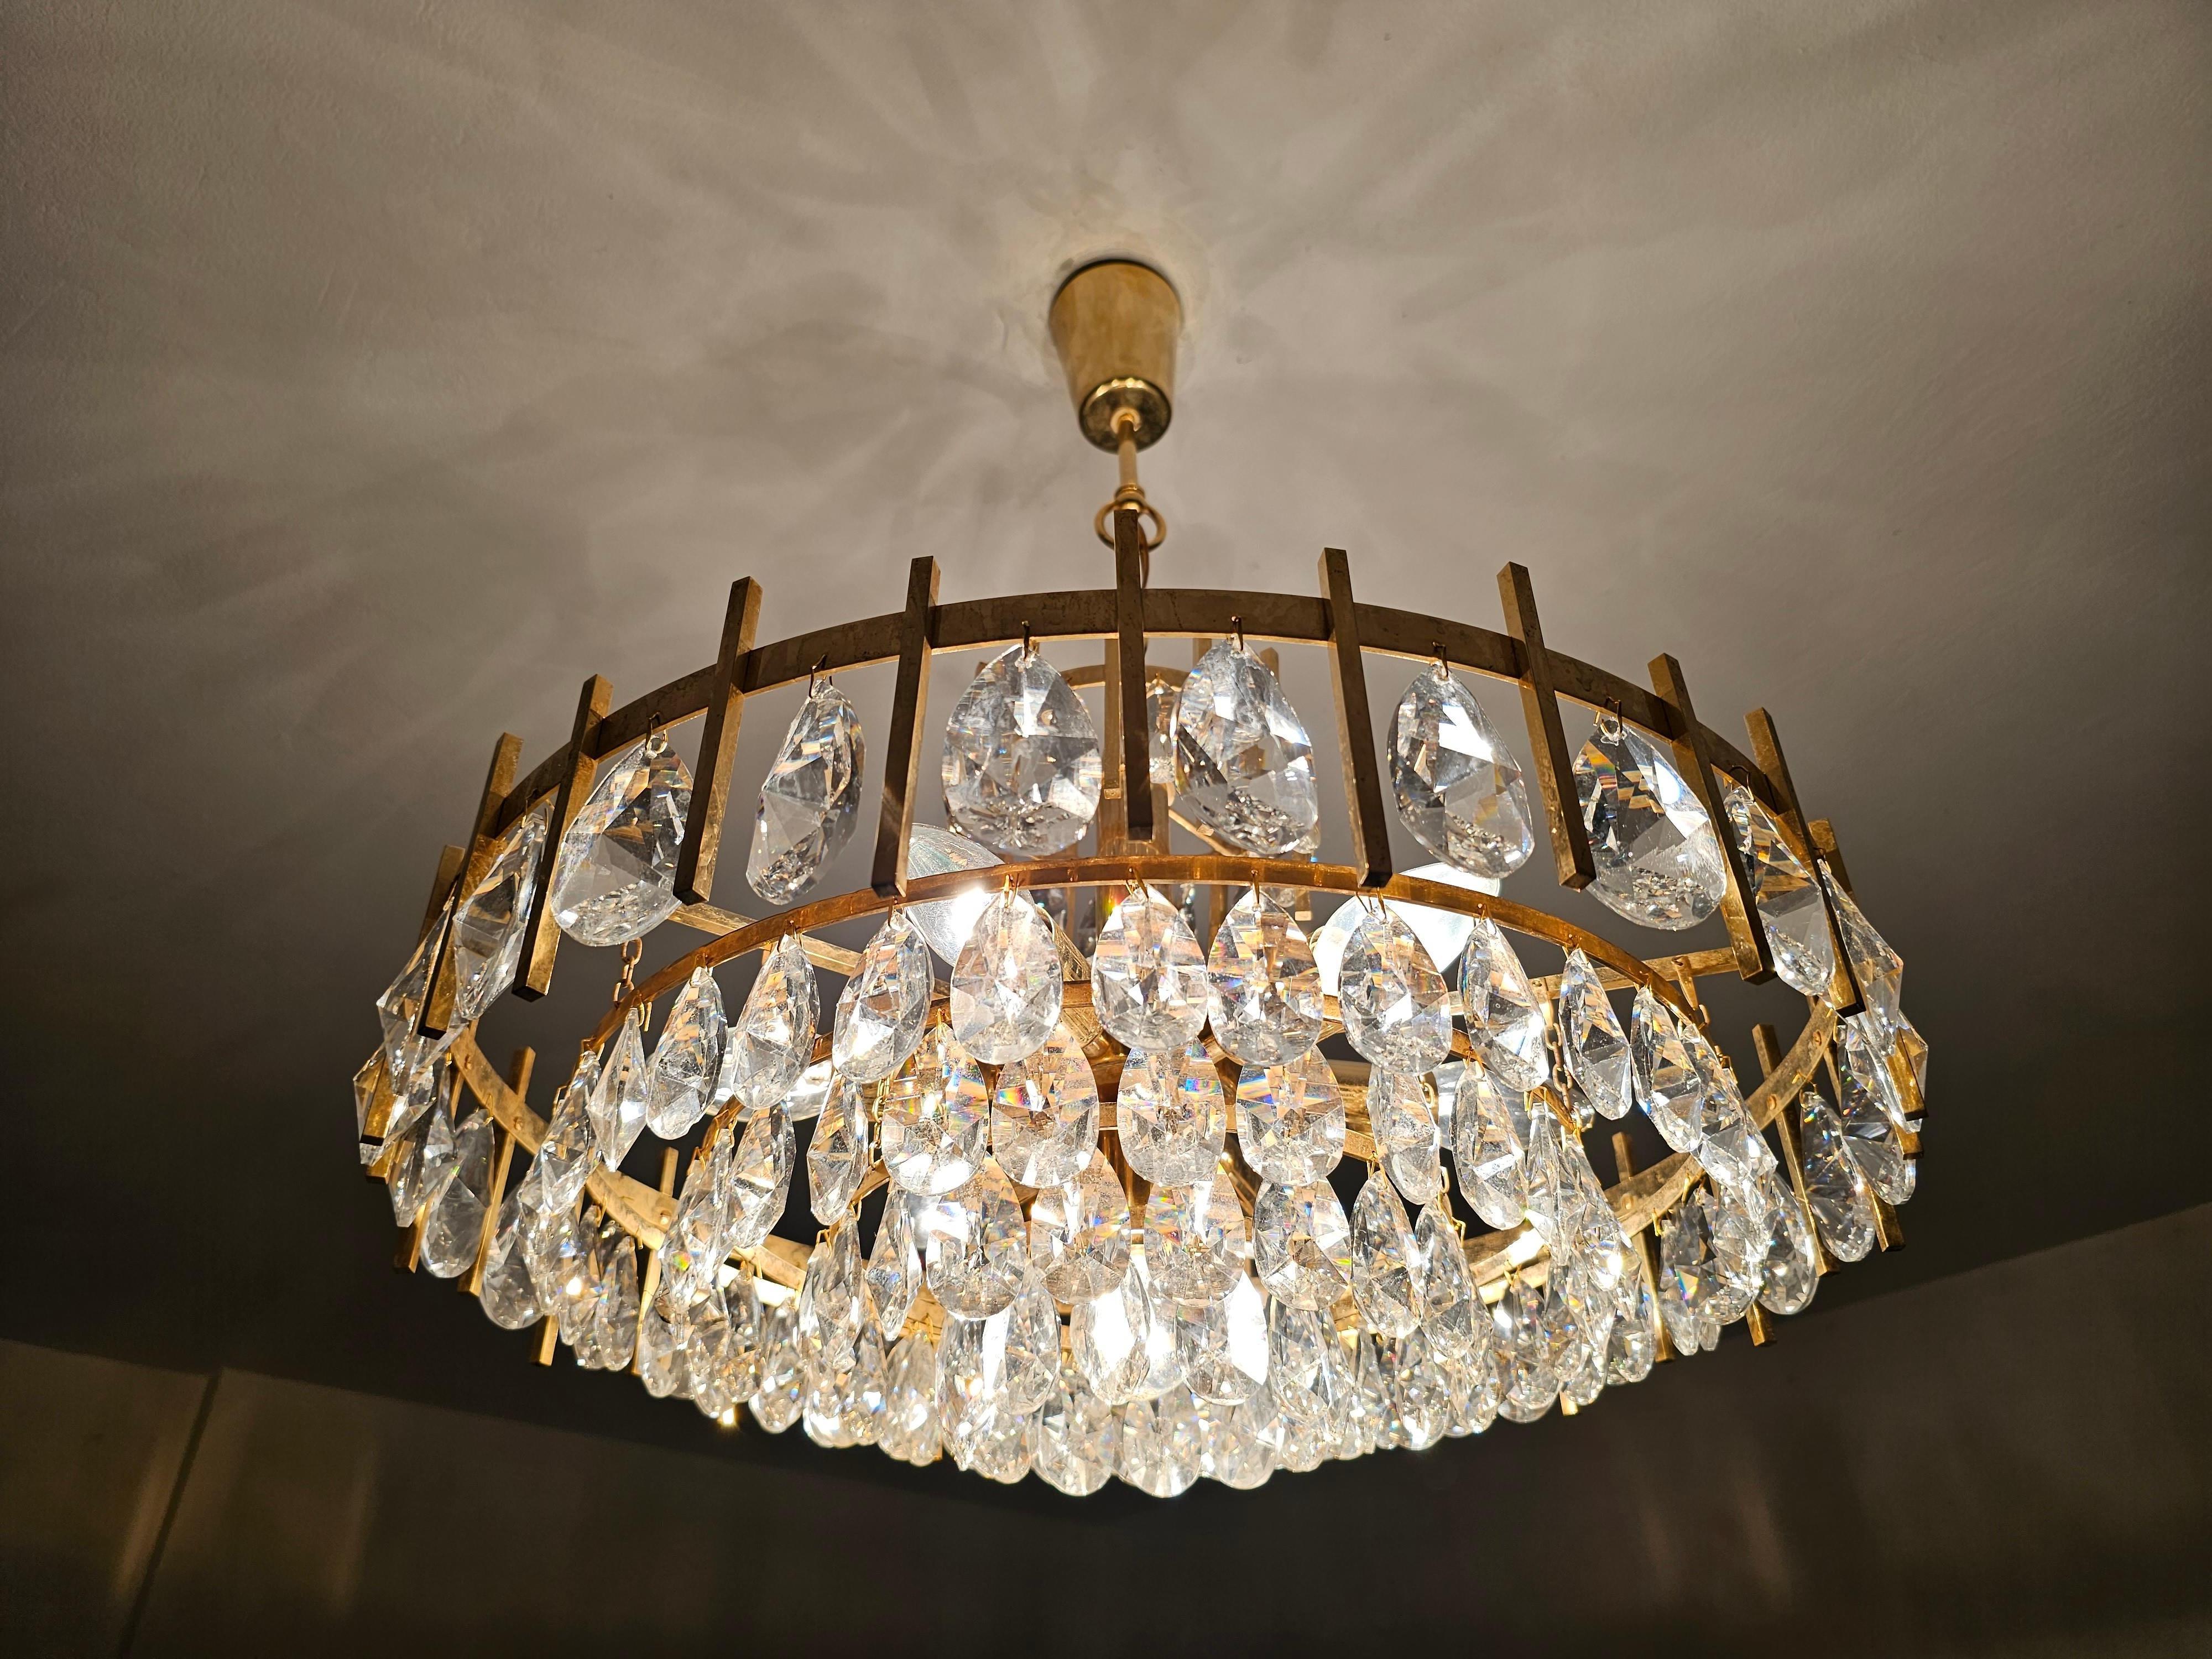 In this listing you will find striking and very luxurious Mid Century Modern chandelier designed by Bakalowits, made in hand-cut crystal and brass. Exquisite craftsmanship! Made in Vienna, Austria in 1960s.

Very good vintage condition with some